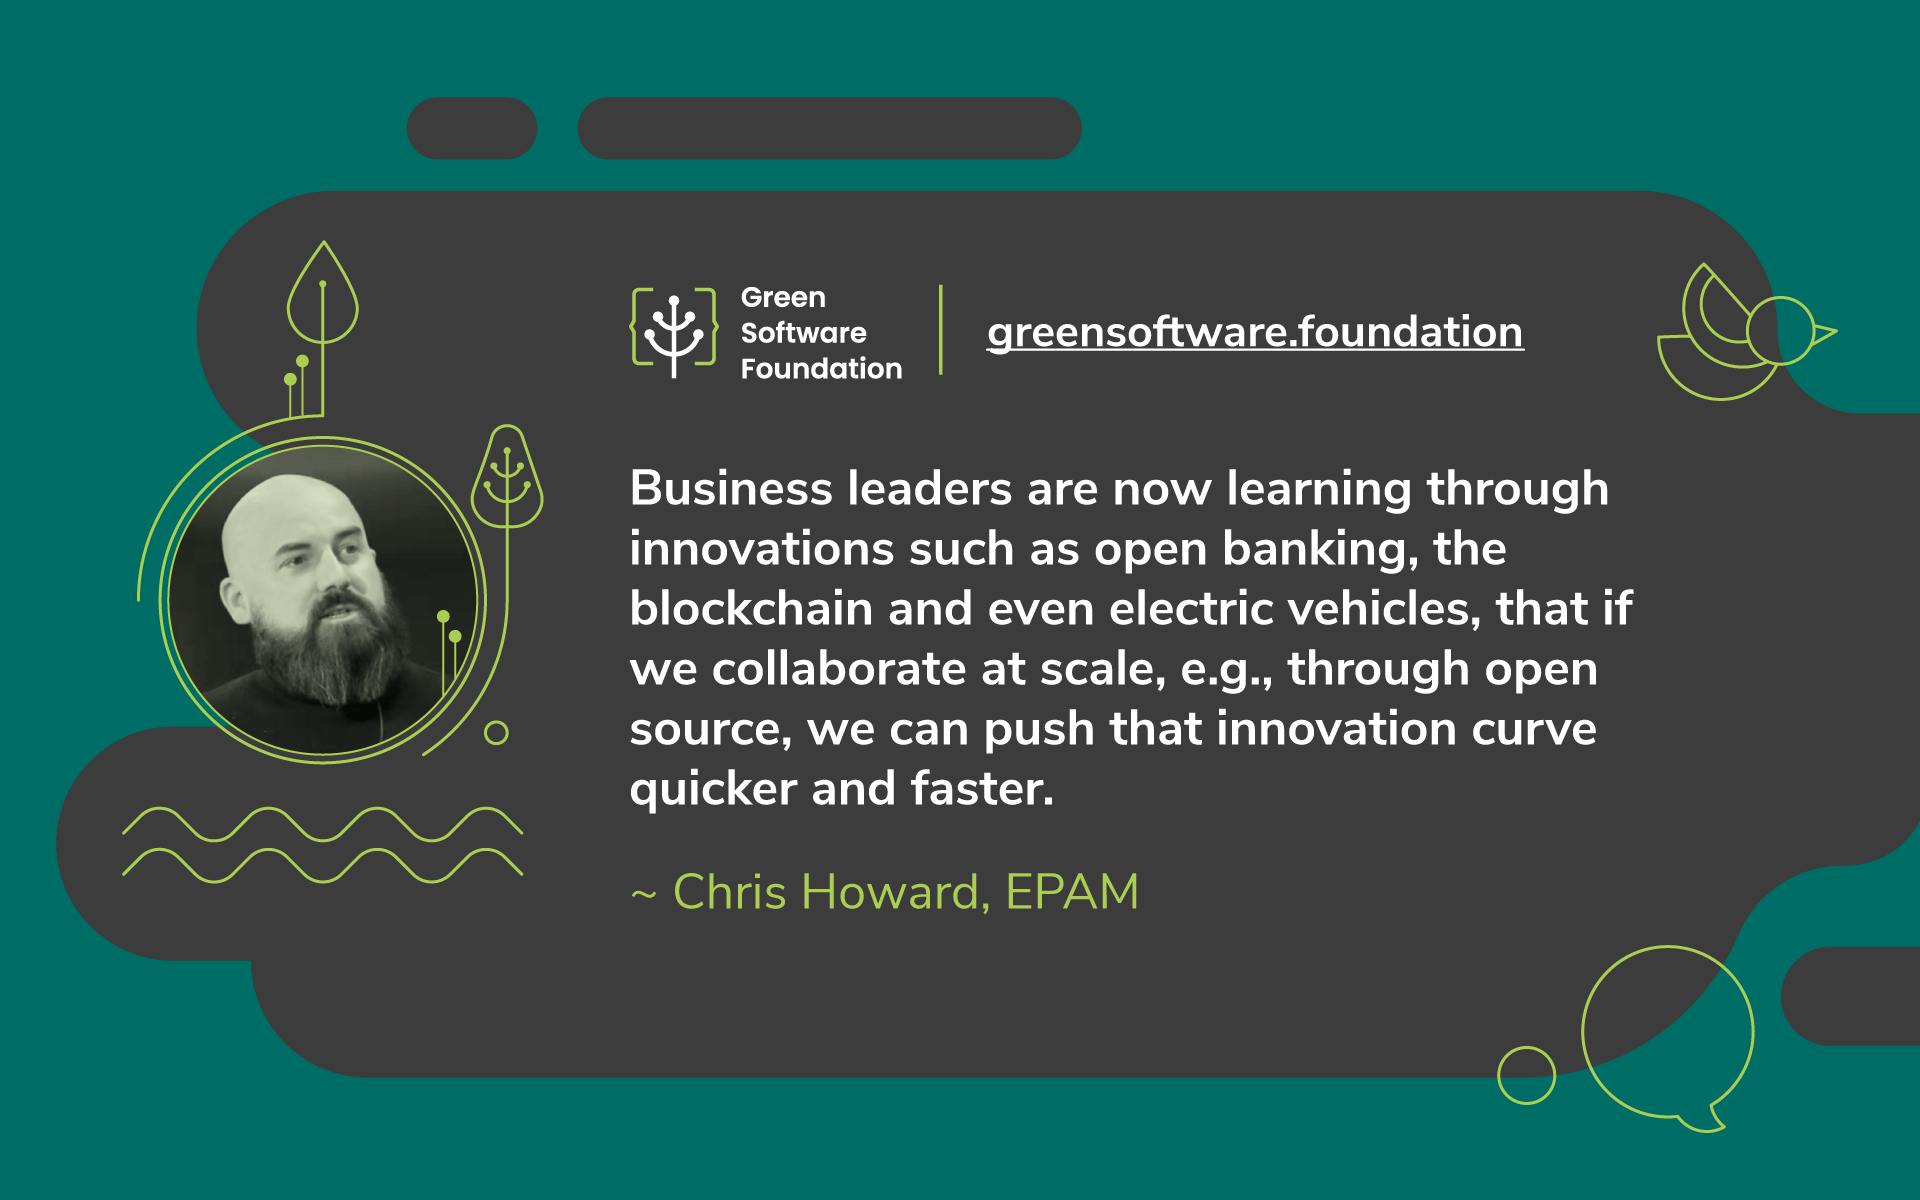 The Open Source Approach is Revolutionizing the Business World - Meet Christopher Howard, Lead Open Source Program Manager at EPAM Systems, Inc.